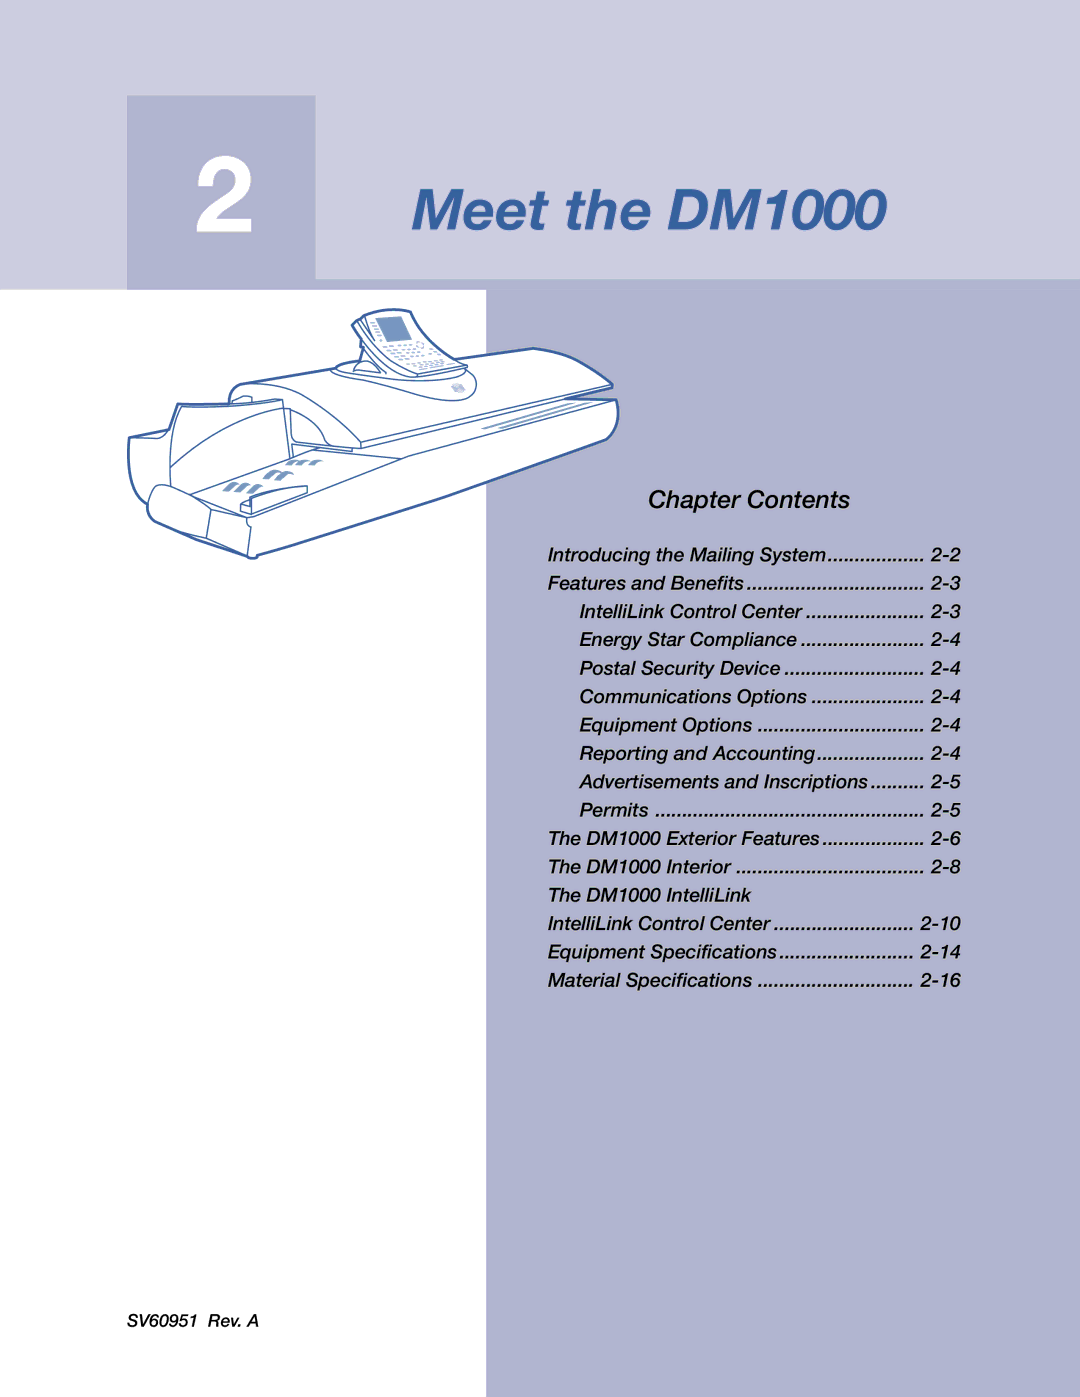 Pitney Bowes manual Meet the DM1000 